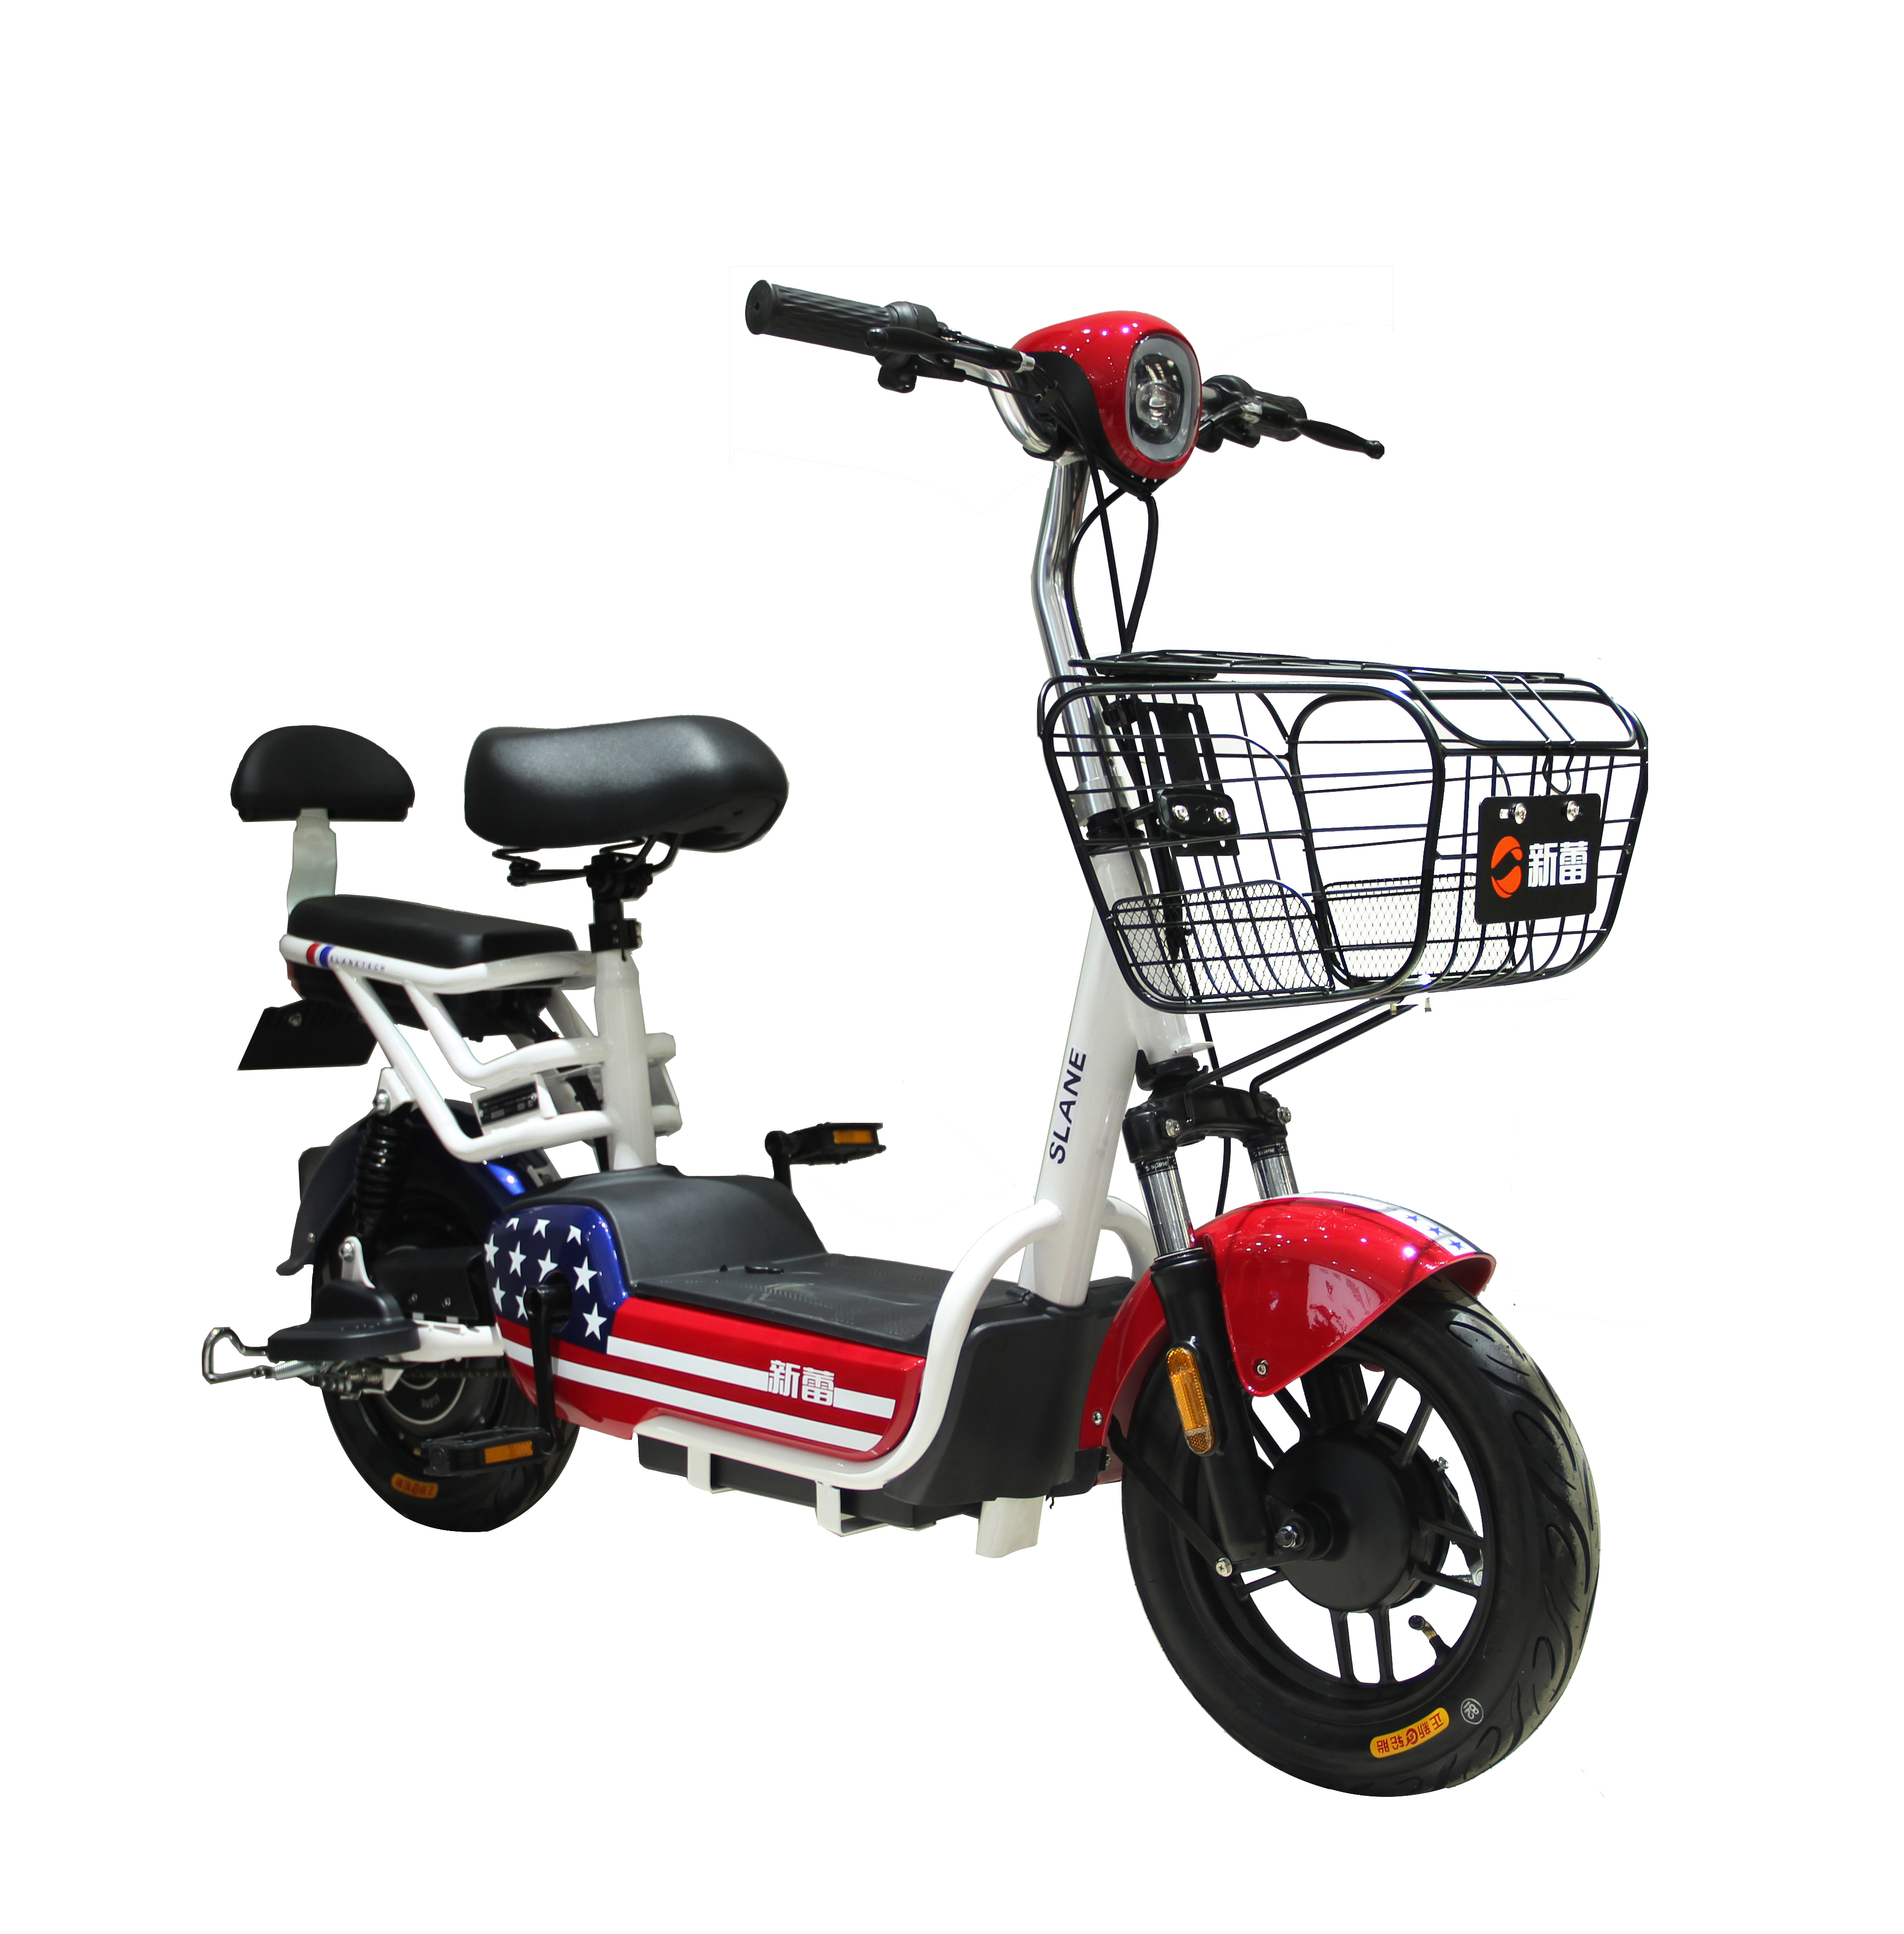 Electric moped